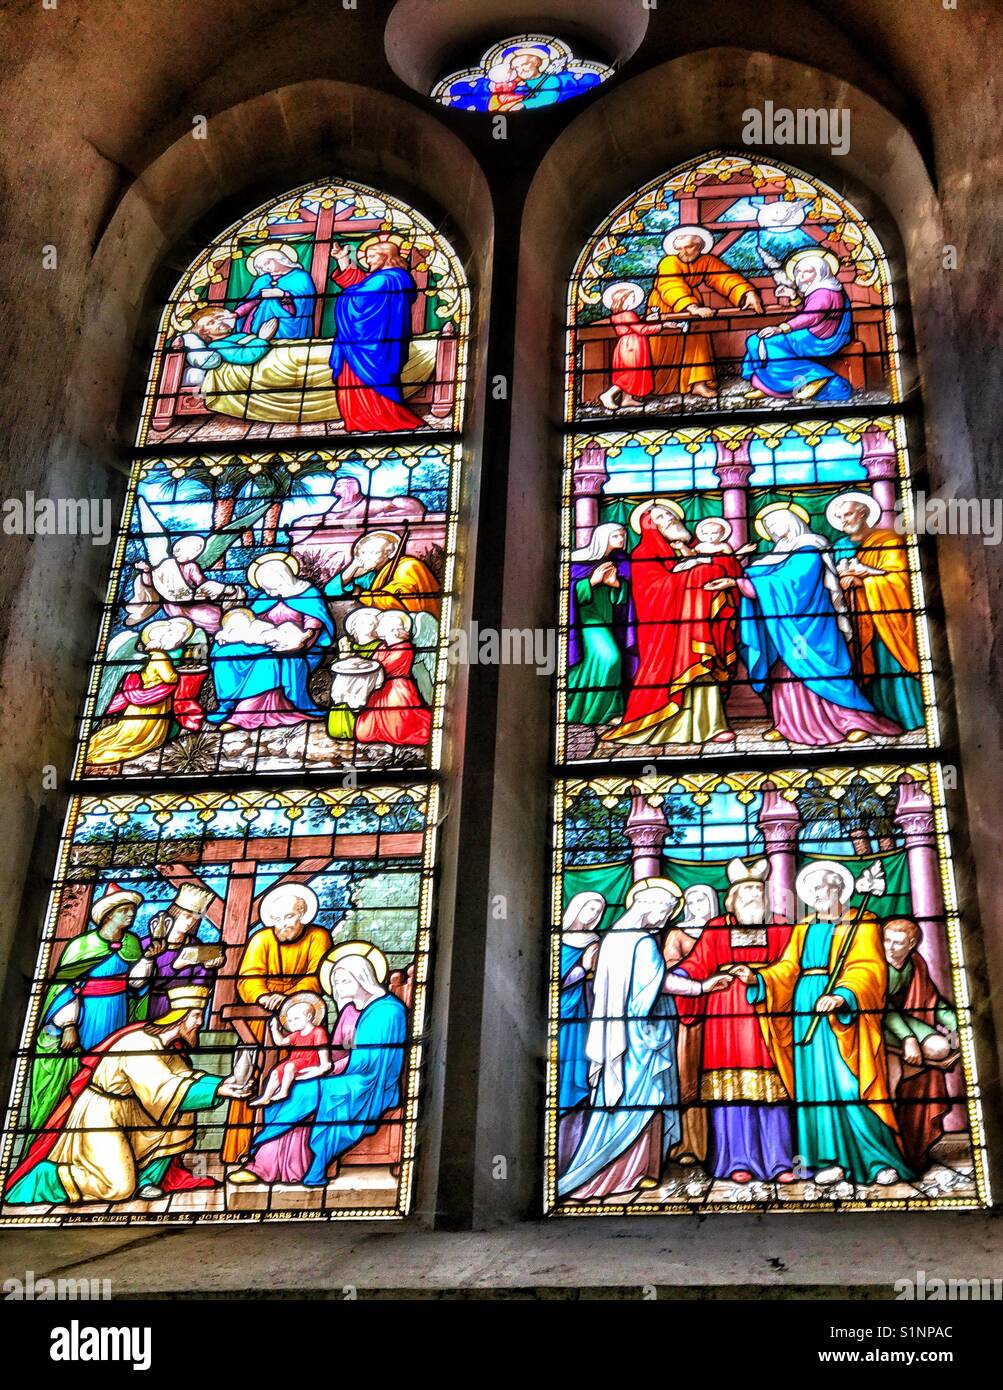 Stain glass in a medieval church. Stock Photo